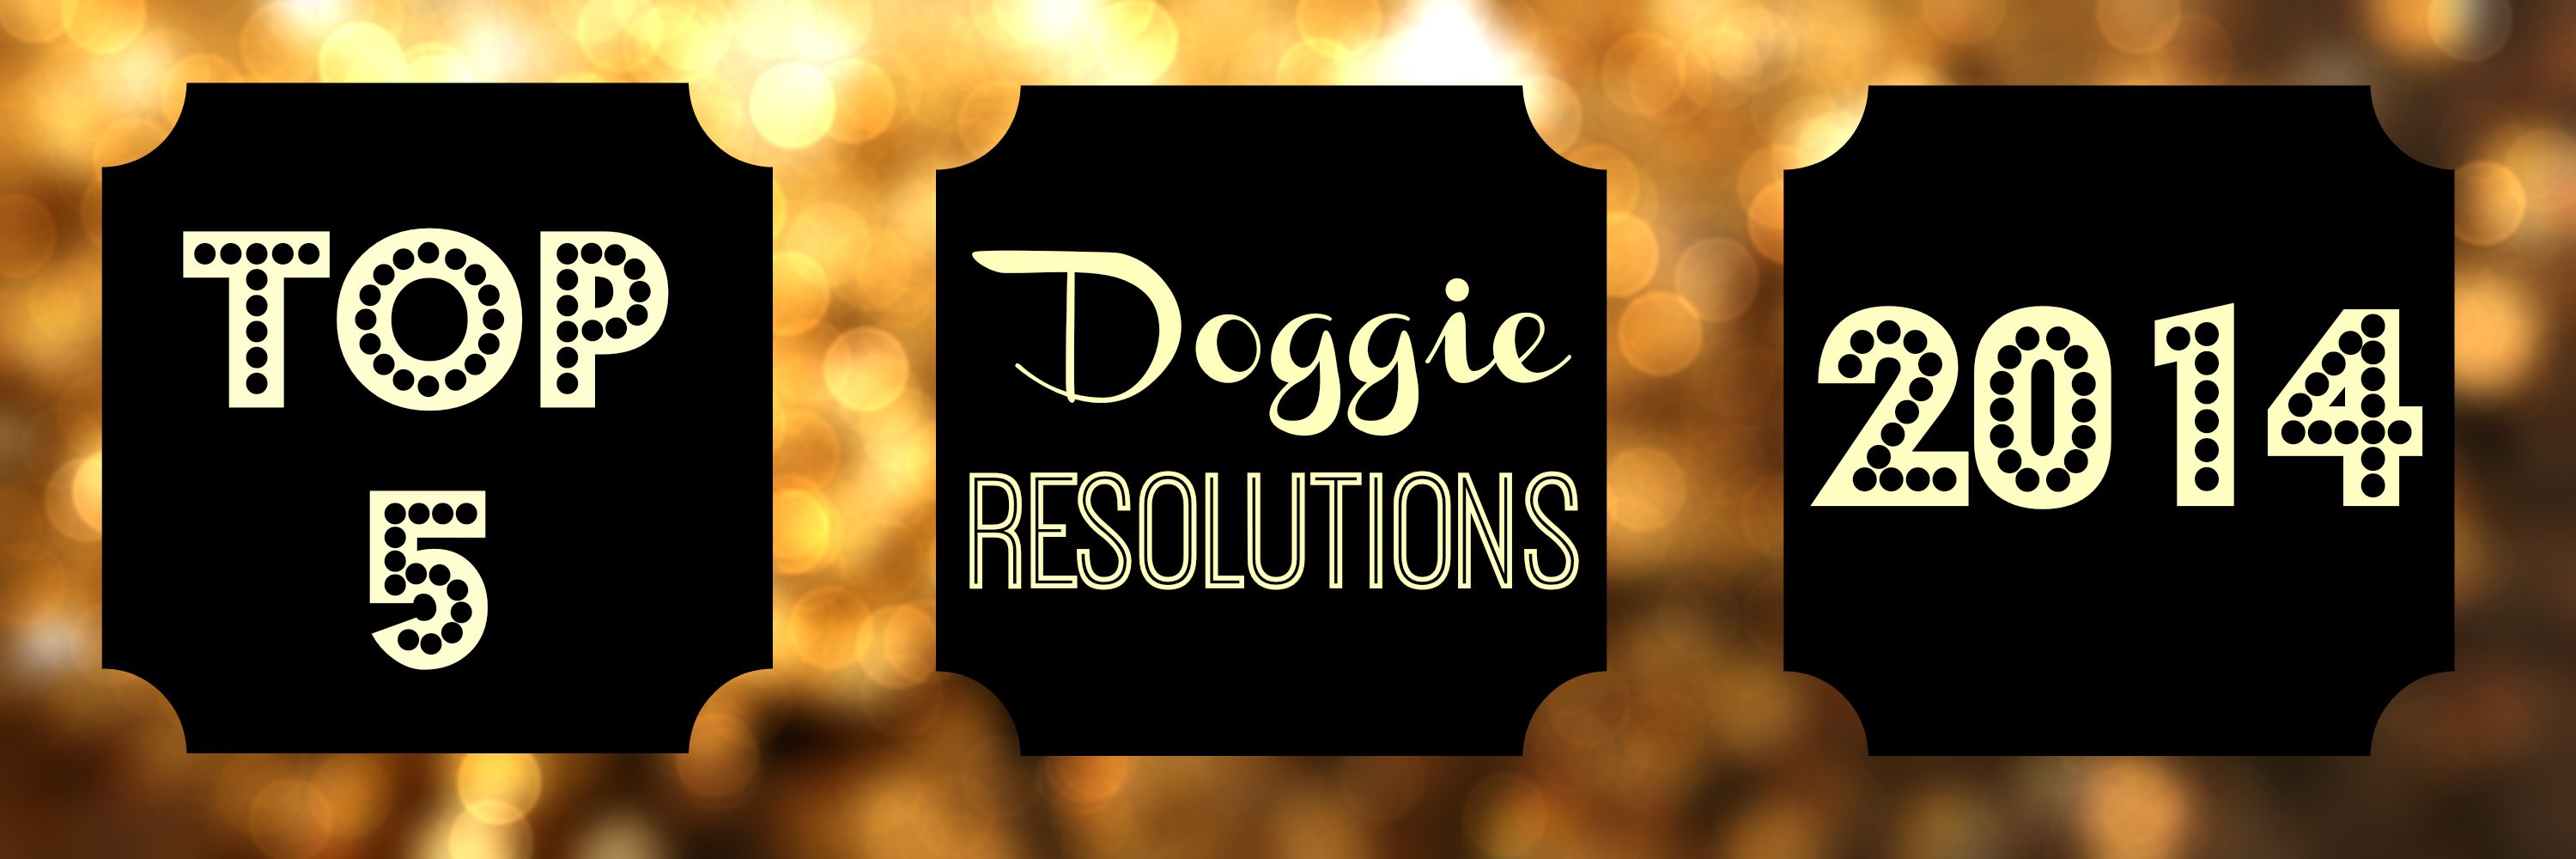 Top 5 New Years Resolutions For Your Dog (And You!)